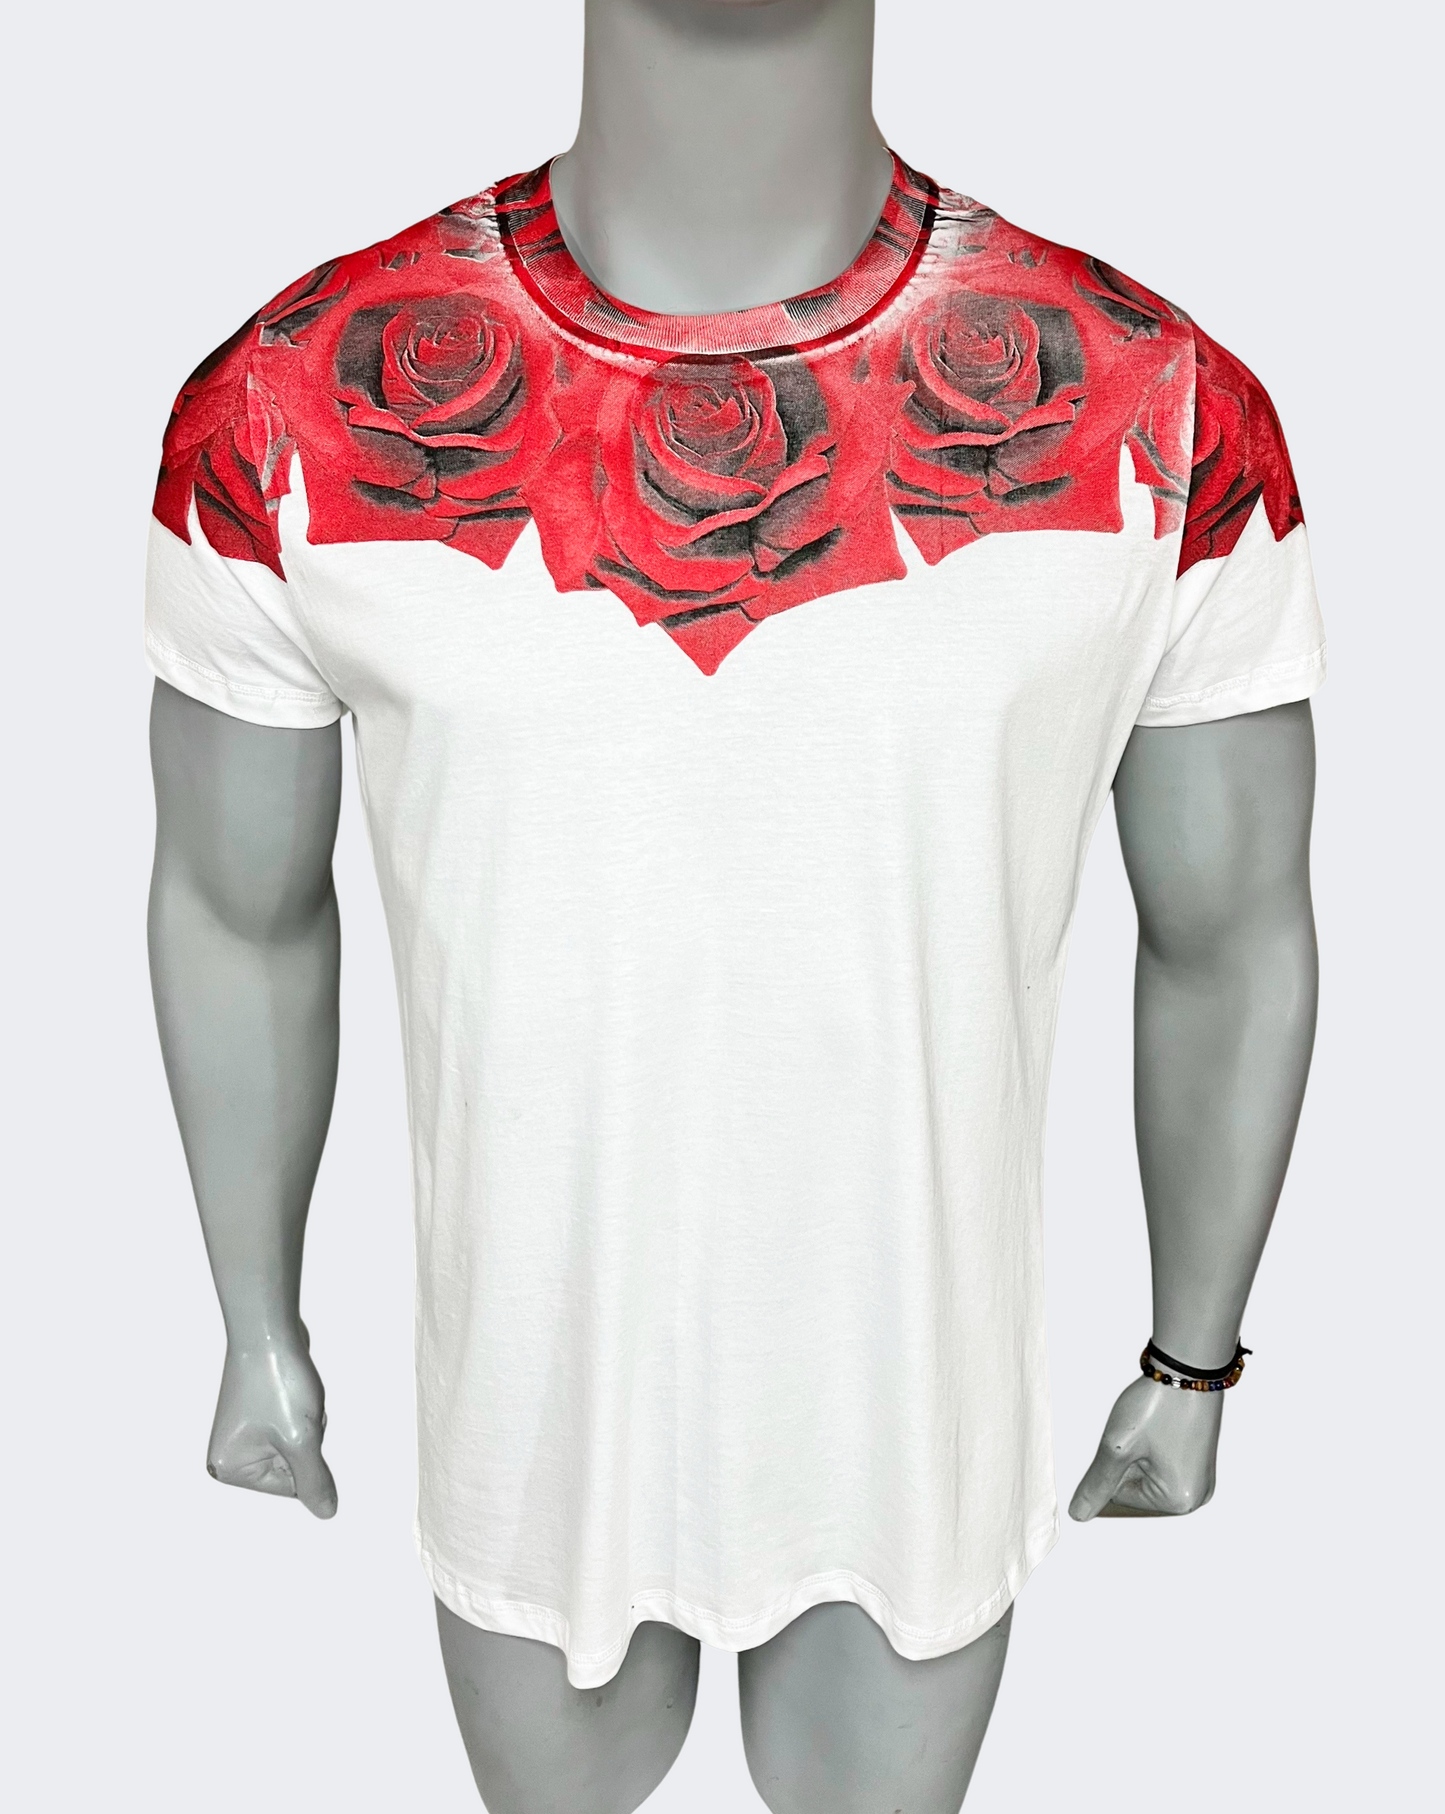 Polo Hombre Red Flower Power - Blanco